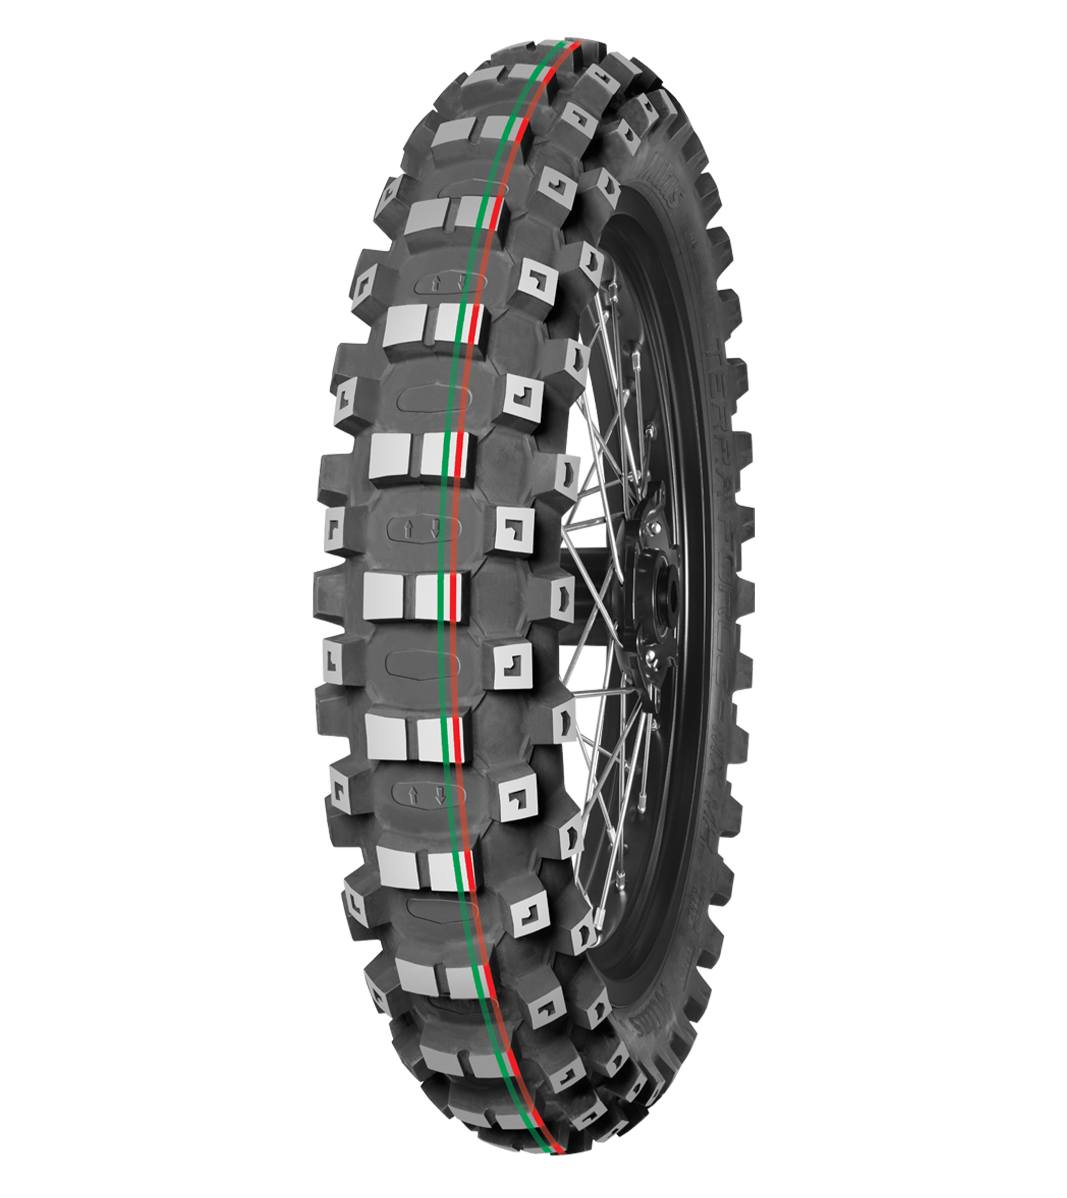 Mitas TERRA FORCE-MX MH 90/100-16 Motocross Competition Off-Road MEDIUM TO HARD 51M Red & Green Tube Rear Tire, 226083, 90/100-16, Motocross, Motocross Competition, Off-Road, Rear, Terra Force, Terra Force-MX MH, Trail, Tires - Imported and distributed in North & South America by Lindeco Genuine Powersports - Premier Powersports Equipment and Accessories for Motorcycle Enthusiasts, Professional Riders and Dealers.